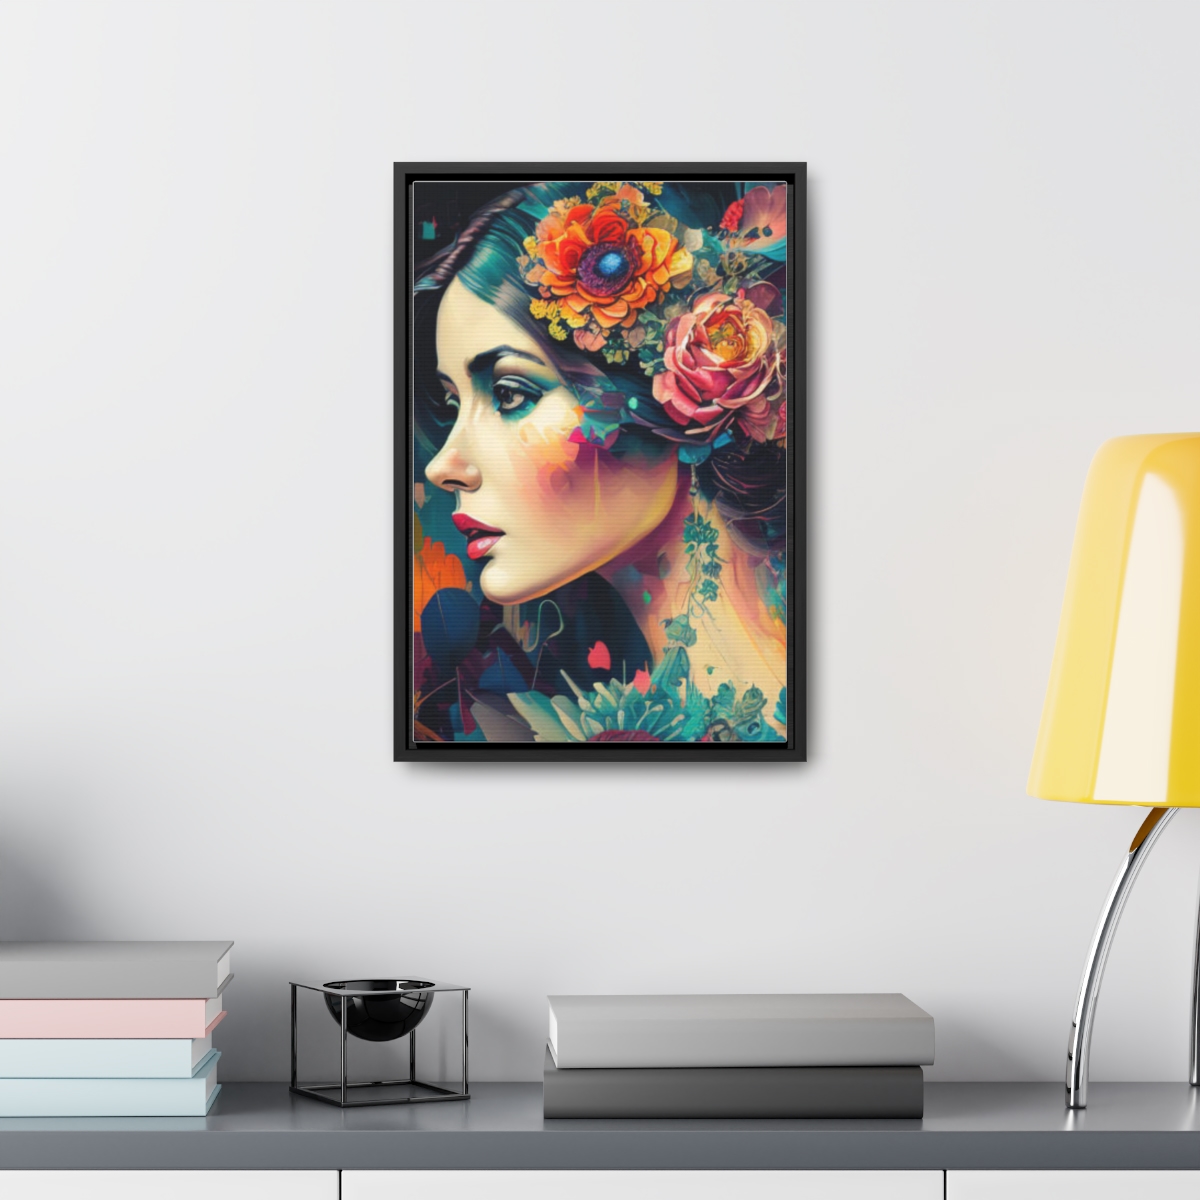 Gallery Canvas Wraps, Vertical Frame product thumbnail image